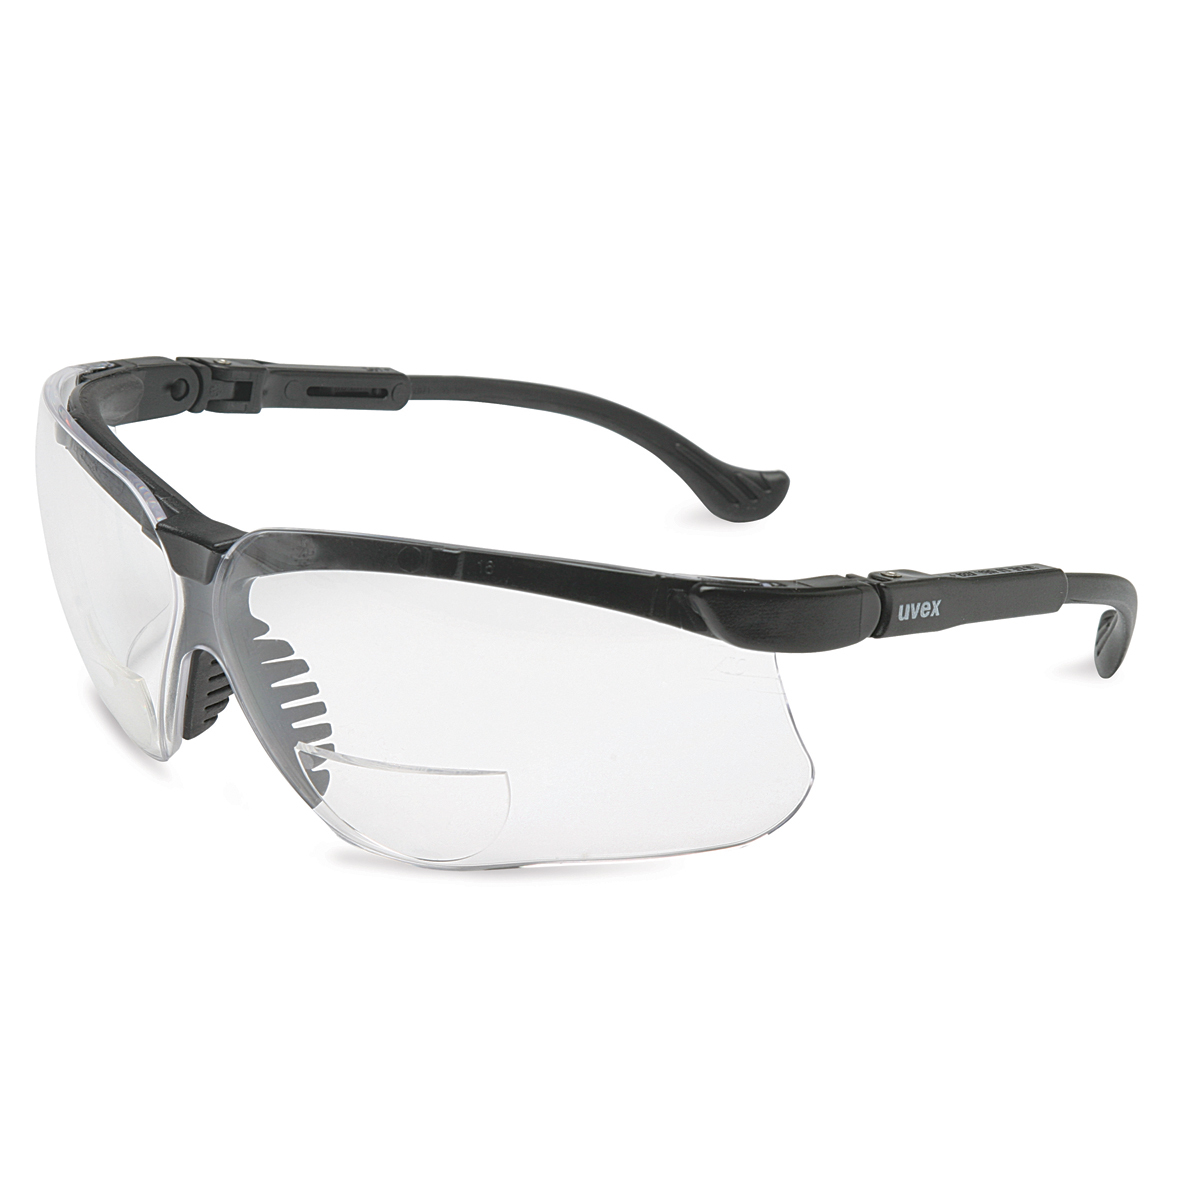 Honeywell Uvex Genesis® 2 Diopter Black Safety Glasses With Clear Anti-Scratch/Hard Coat Lens (Availability restrictions apply.)